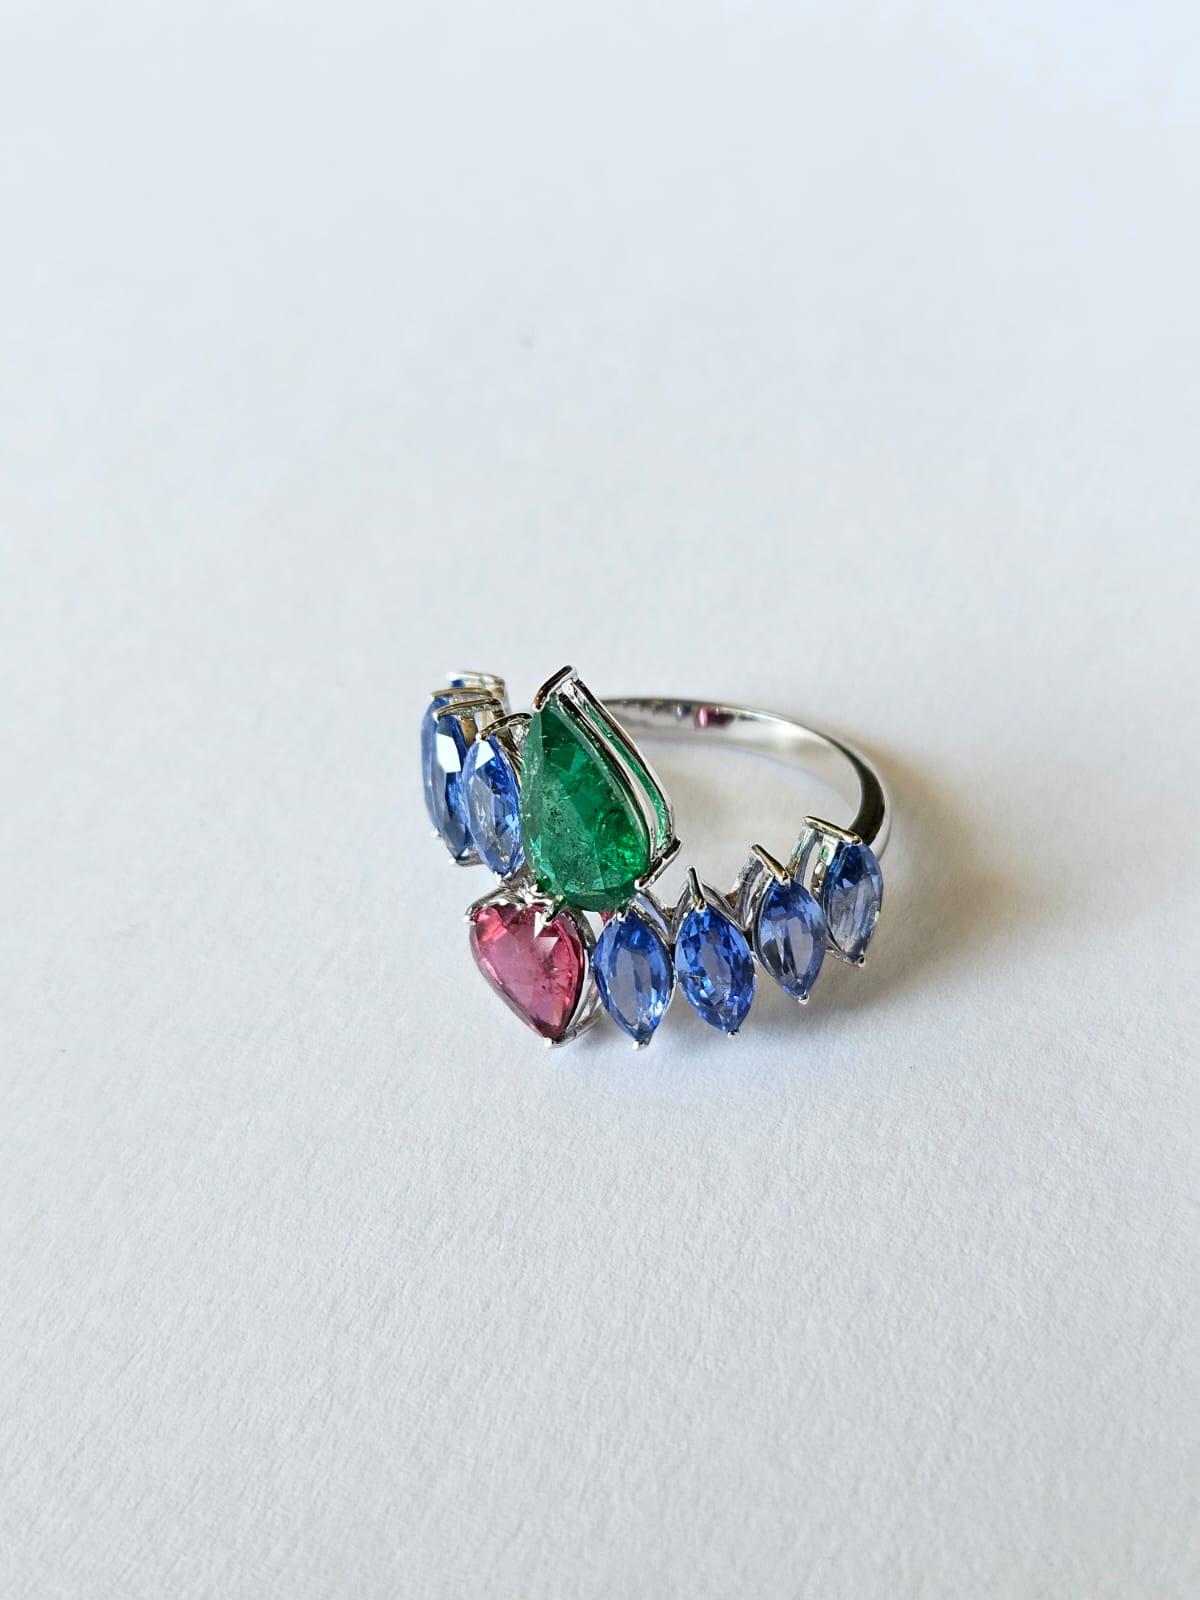 Set in 18K White Gold, 3.44 carats Blue Sapphire, Emerald & Tourmaline Band Ring For Sale 2